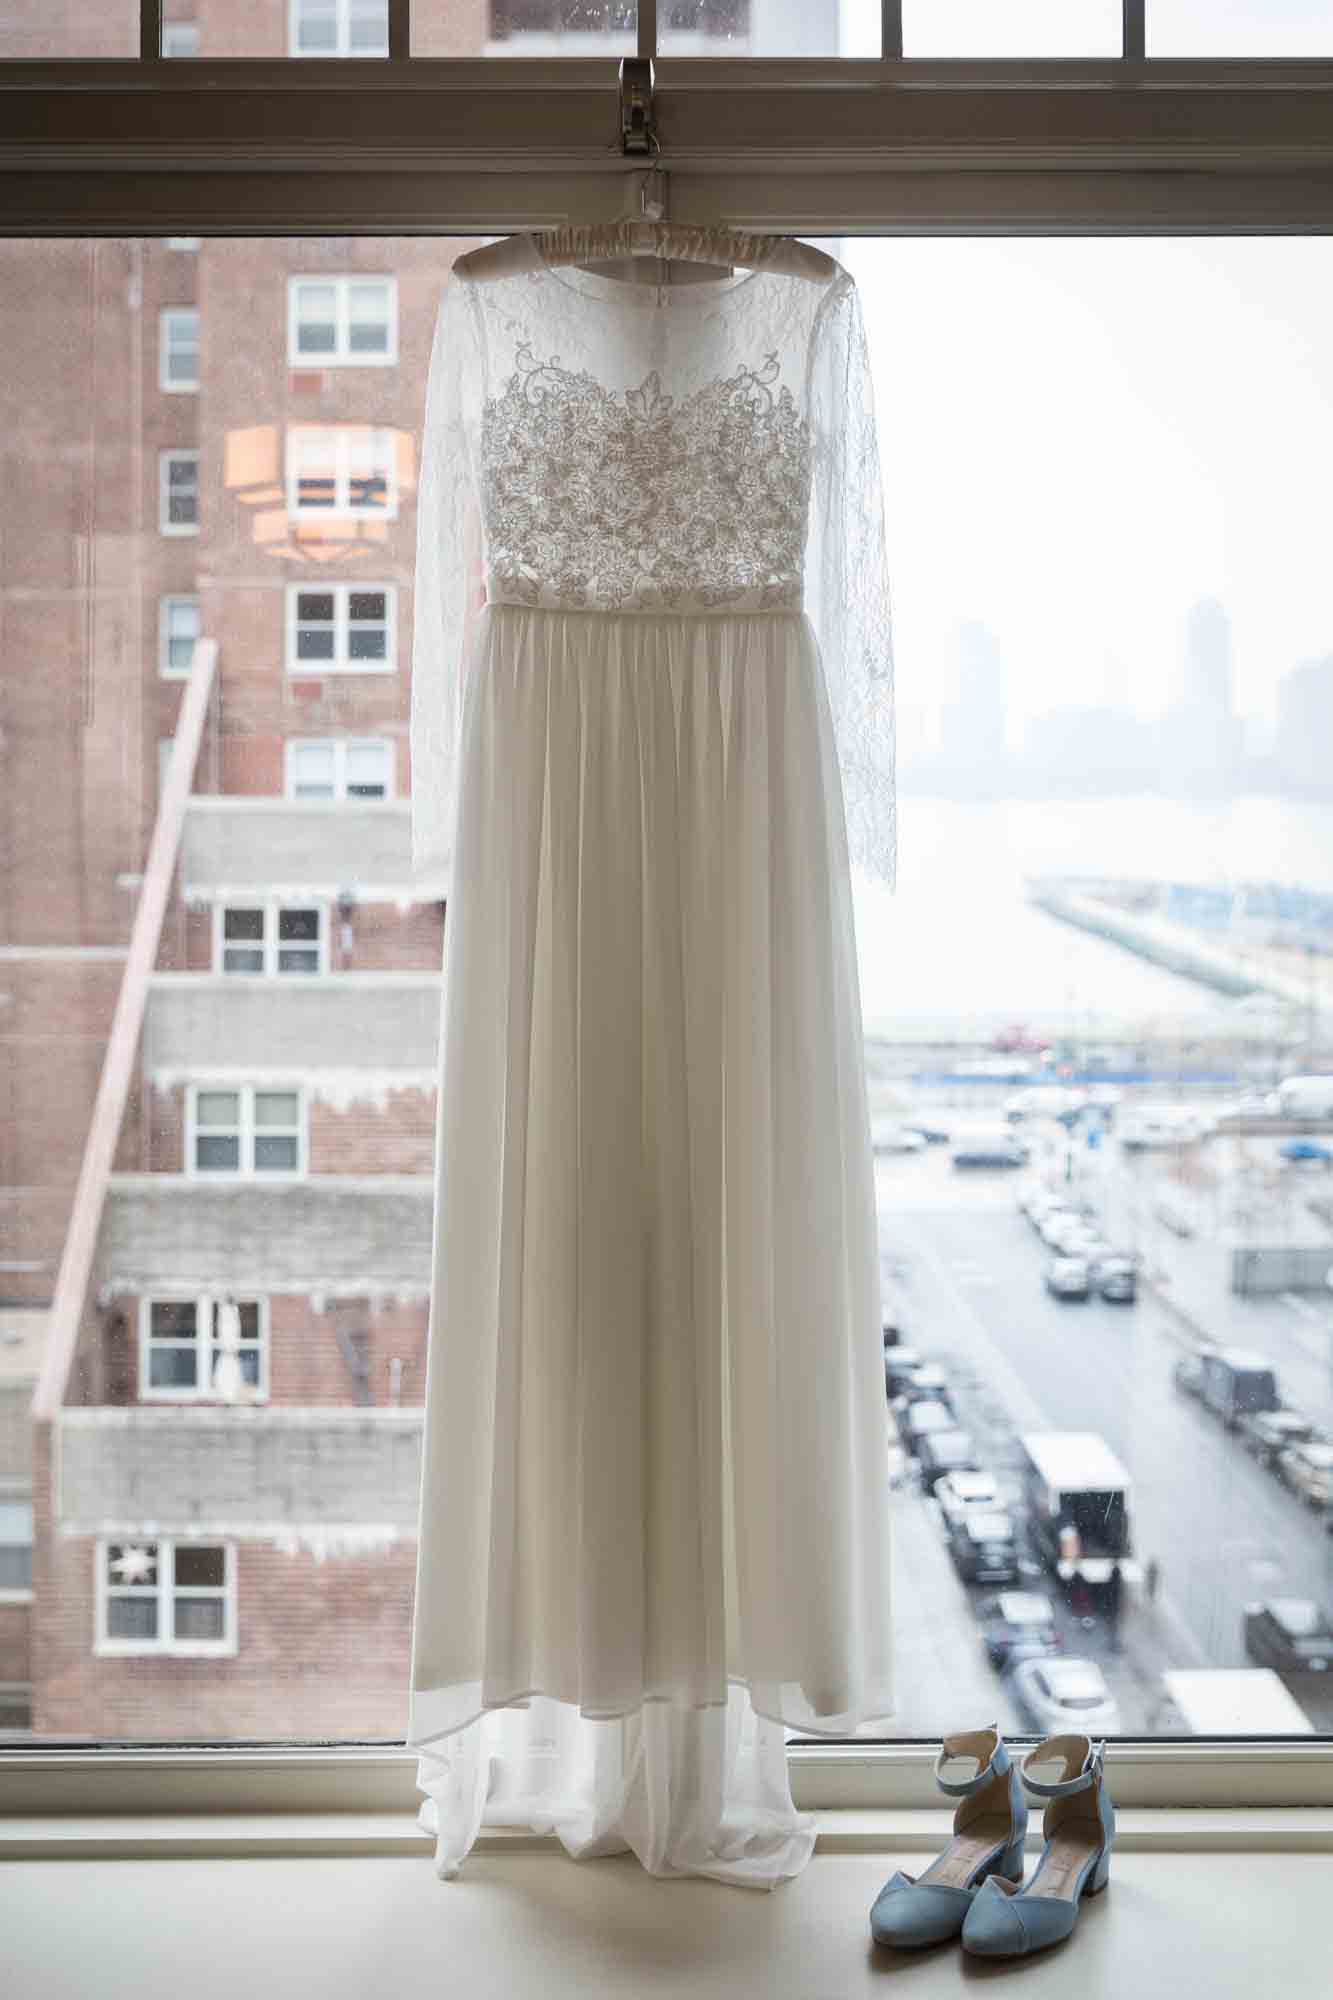 Wedding dress hanging in front of a window